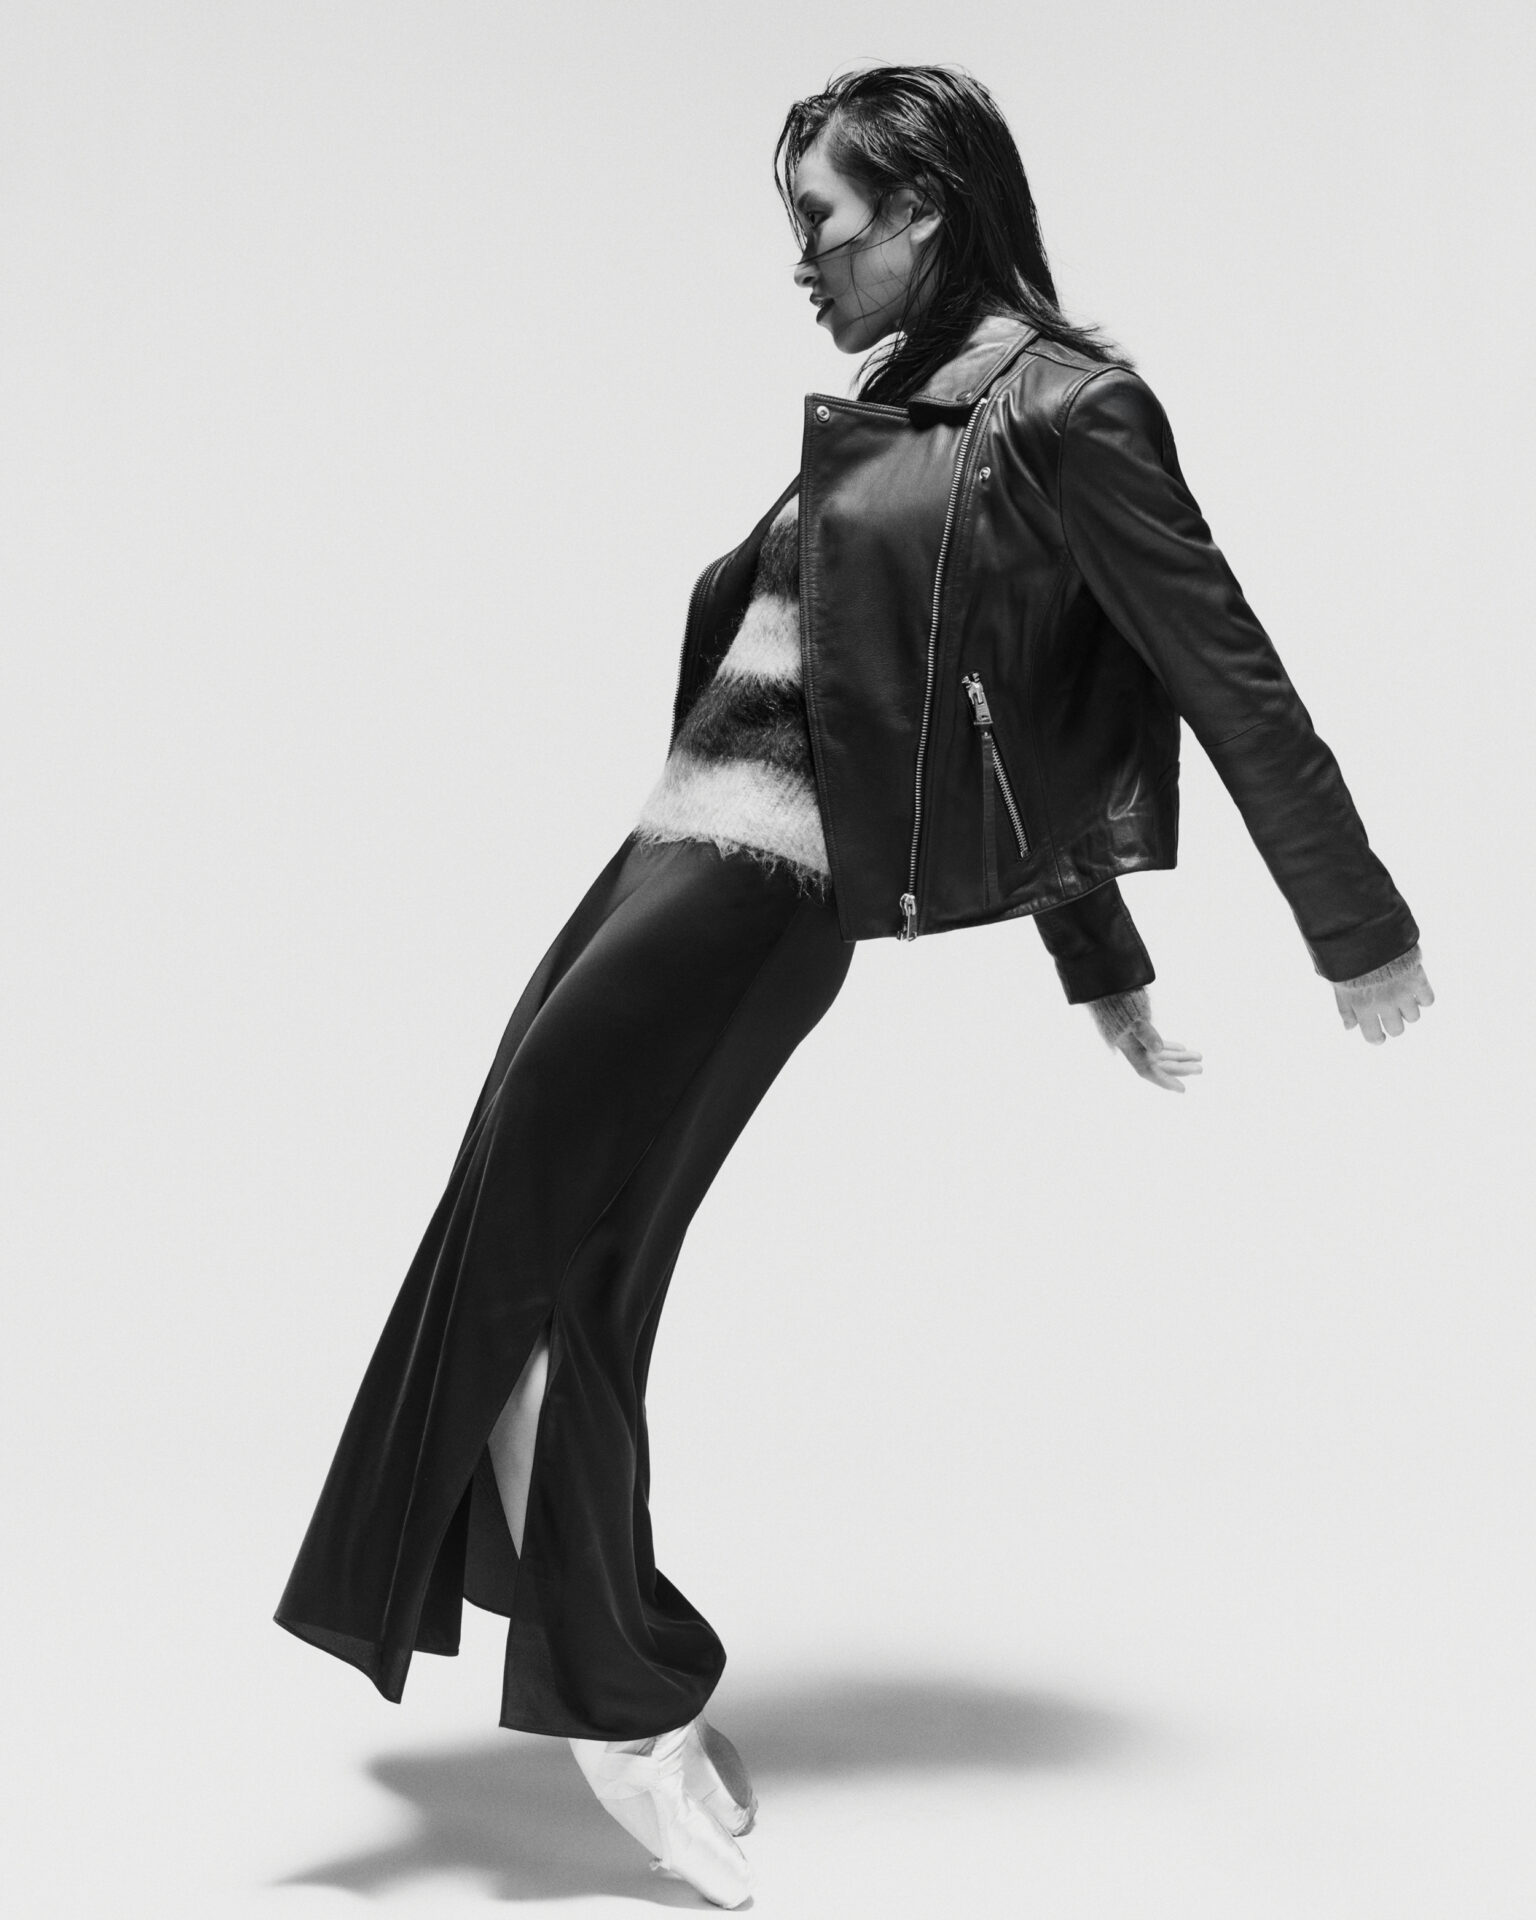 AllSaints collaborate with The Royal Ballet - Rolling Stone UK